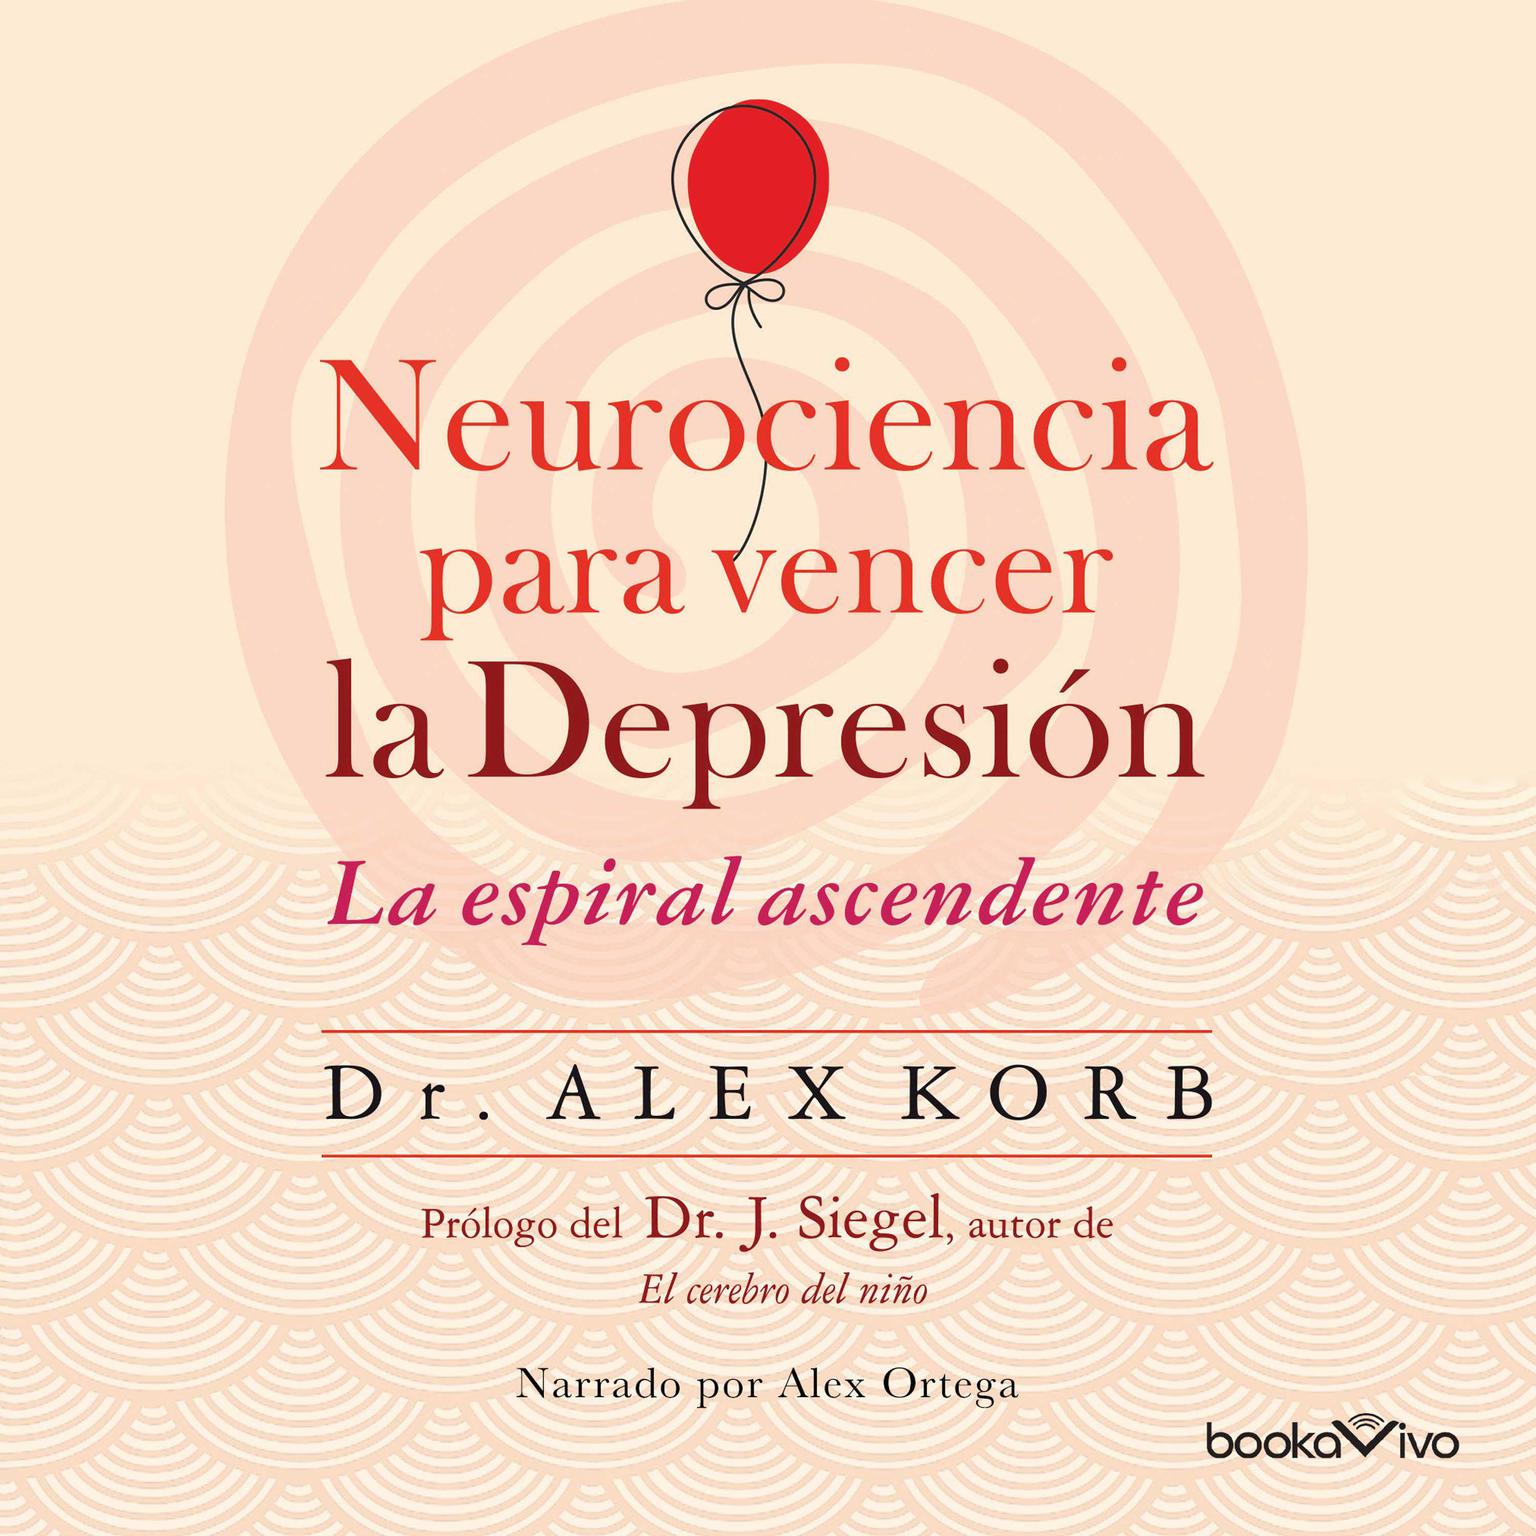 Neurociencia para vencer la depresión: Le espiral ascendente (Using neuroscience to reverse the course of depression one small change at a time) Audiobook, by Alex Korb